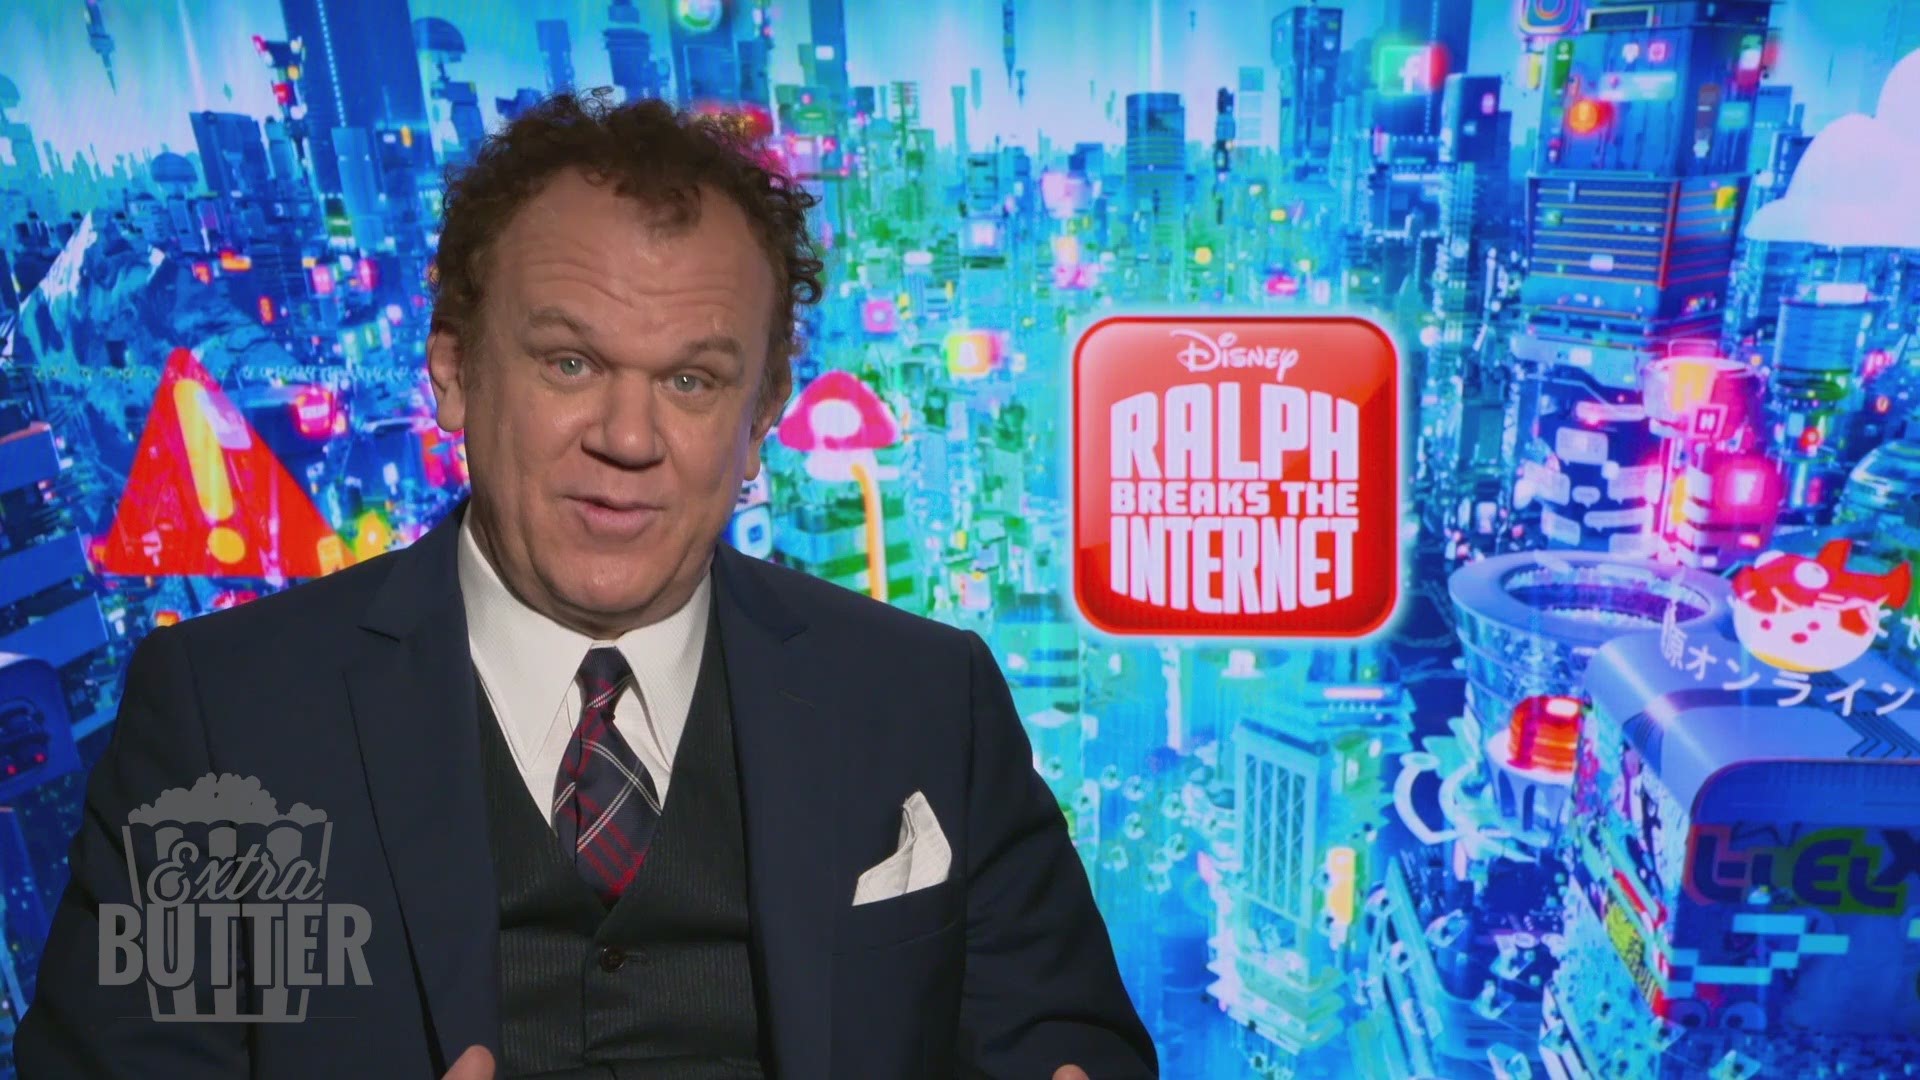 John C. Reilly talks with Mark S. Allen about 'Wreck it Ralph 2.' John shares his favorite scene in the movie (hint: it involves the Disney Princesses), making a buddy movie with Sarah Silverman, and his positive outlook on life. Interview provided by Wal